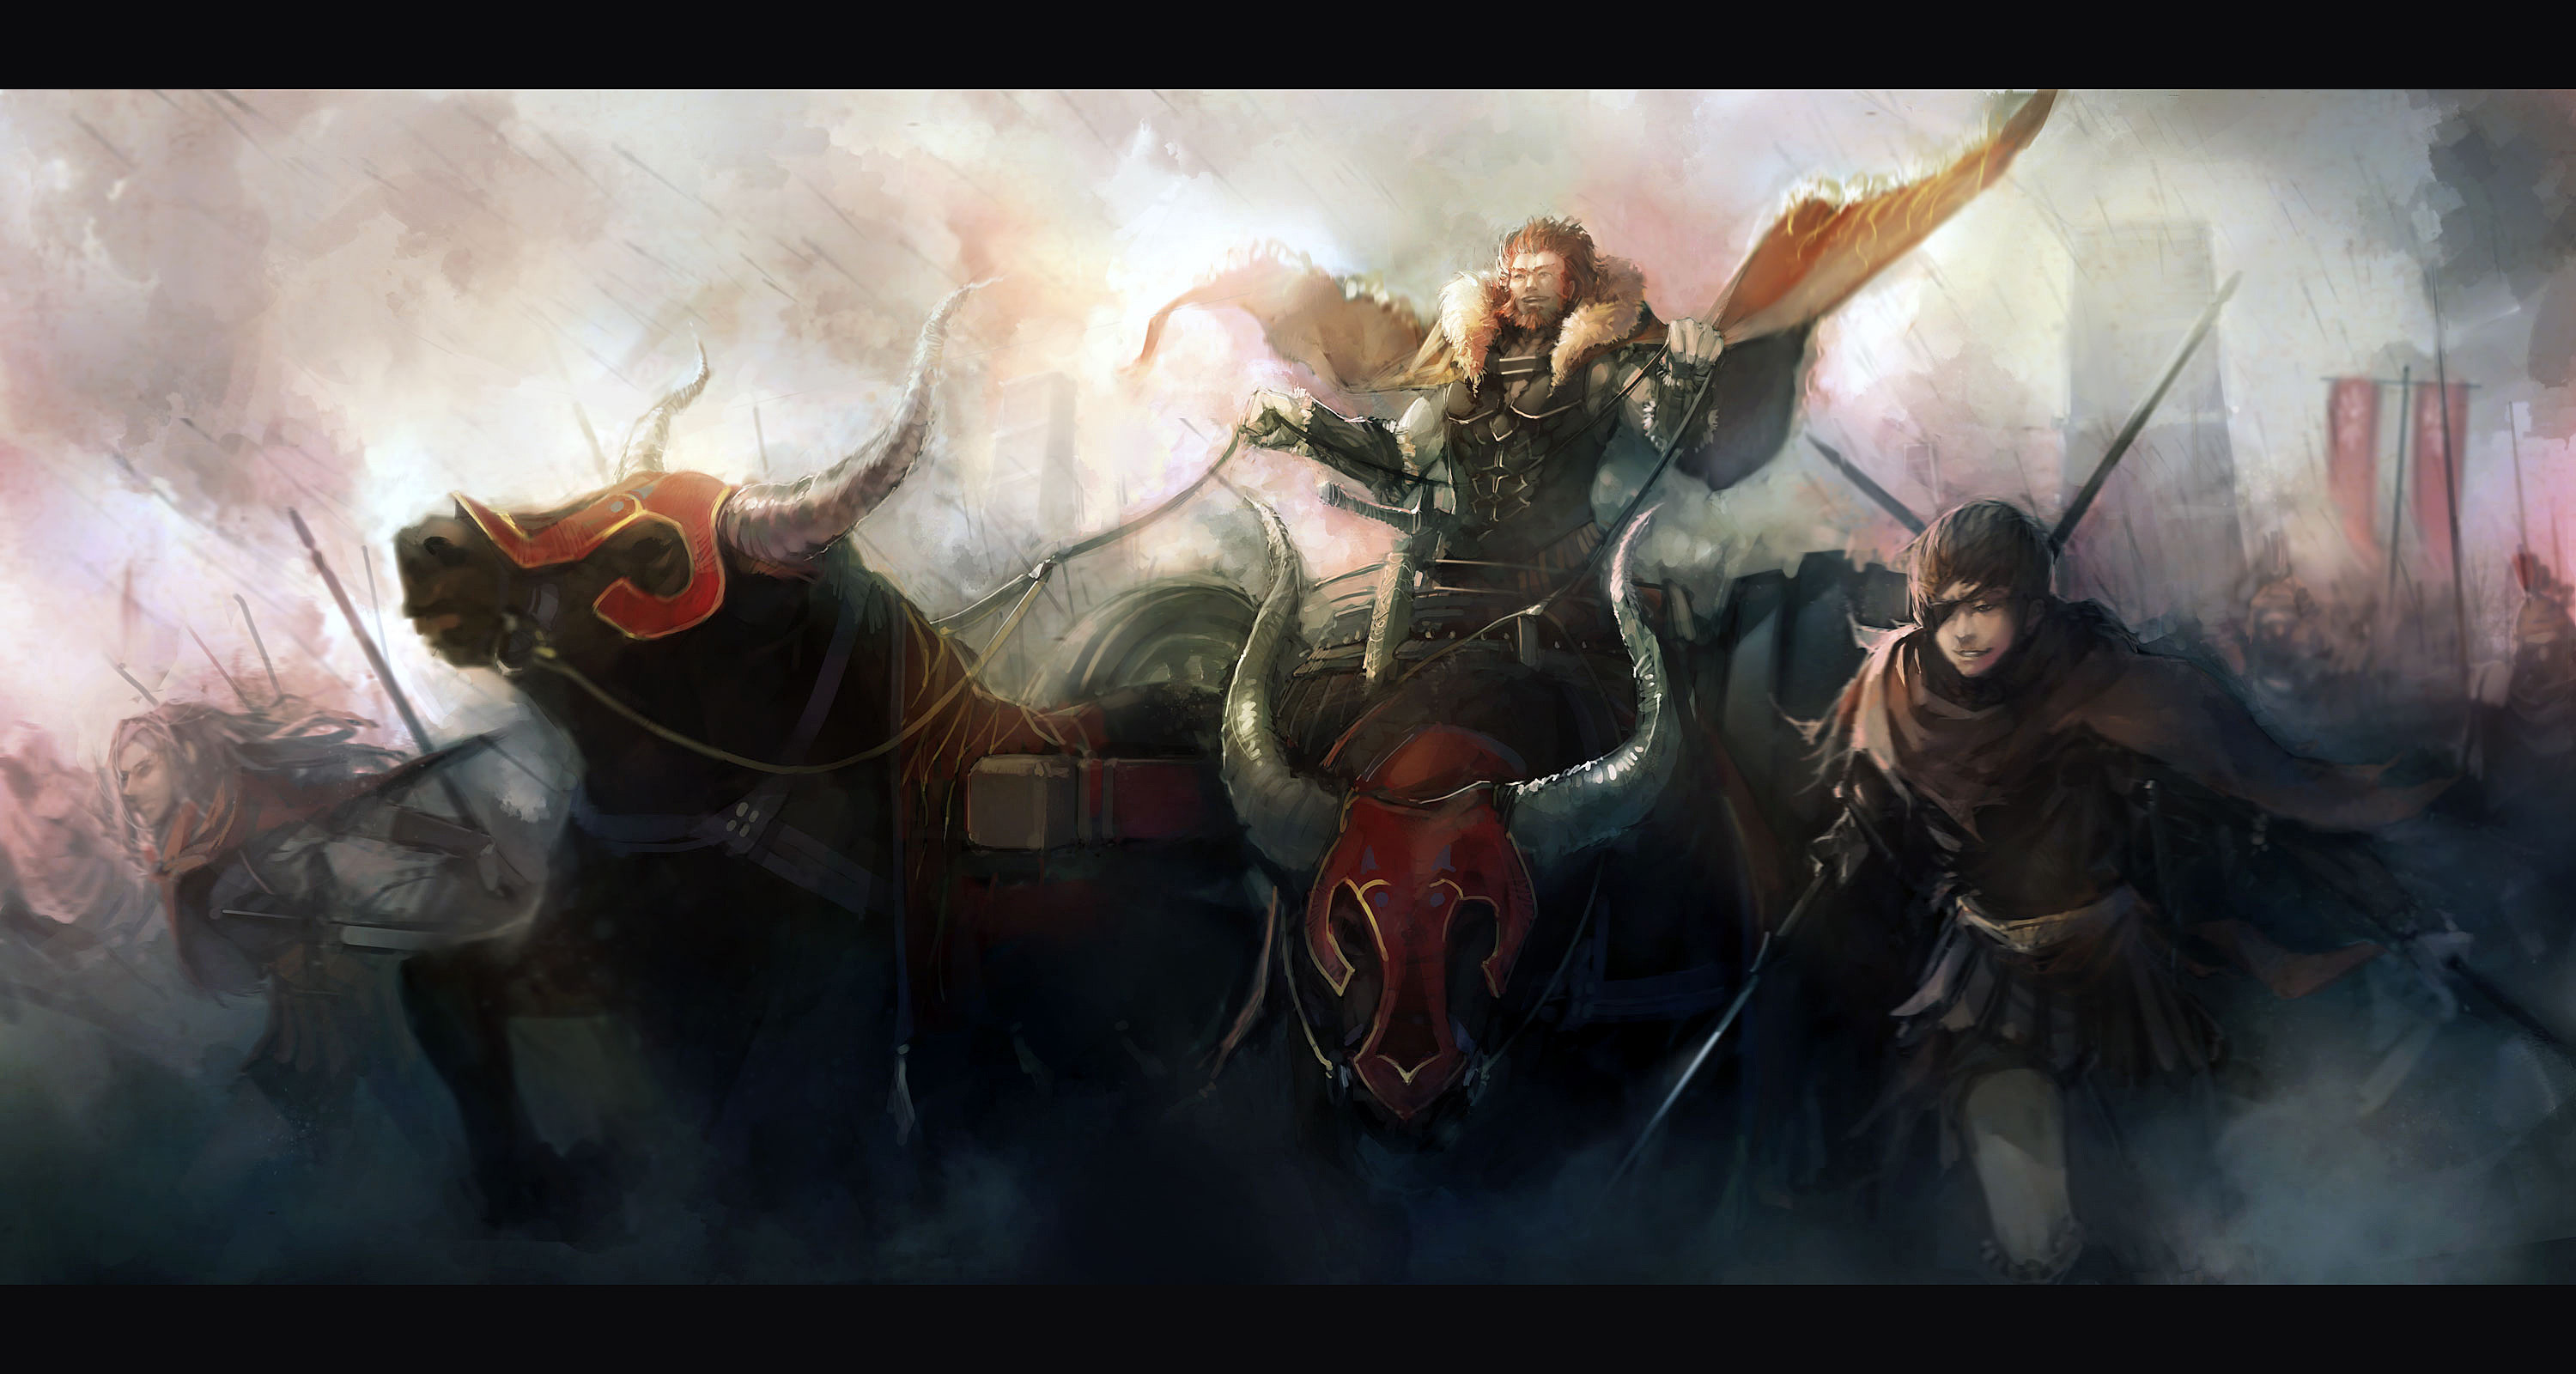 3000x1600 Alexander the Great, Iskander/Rider, Fate Zero Ohh how I cried.